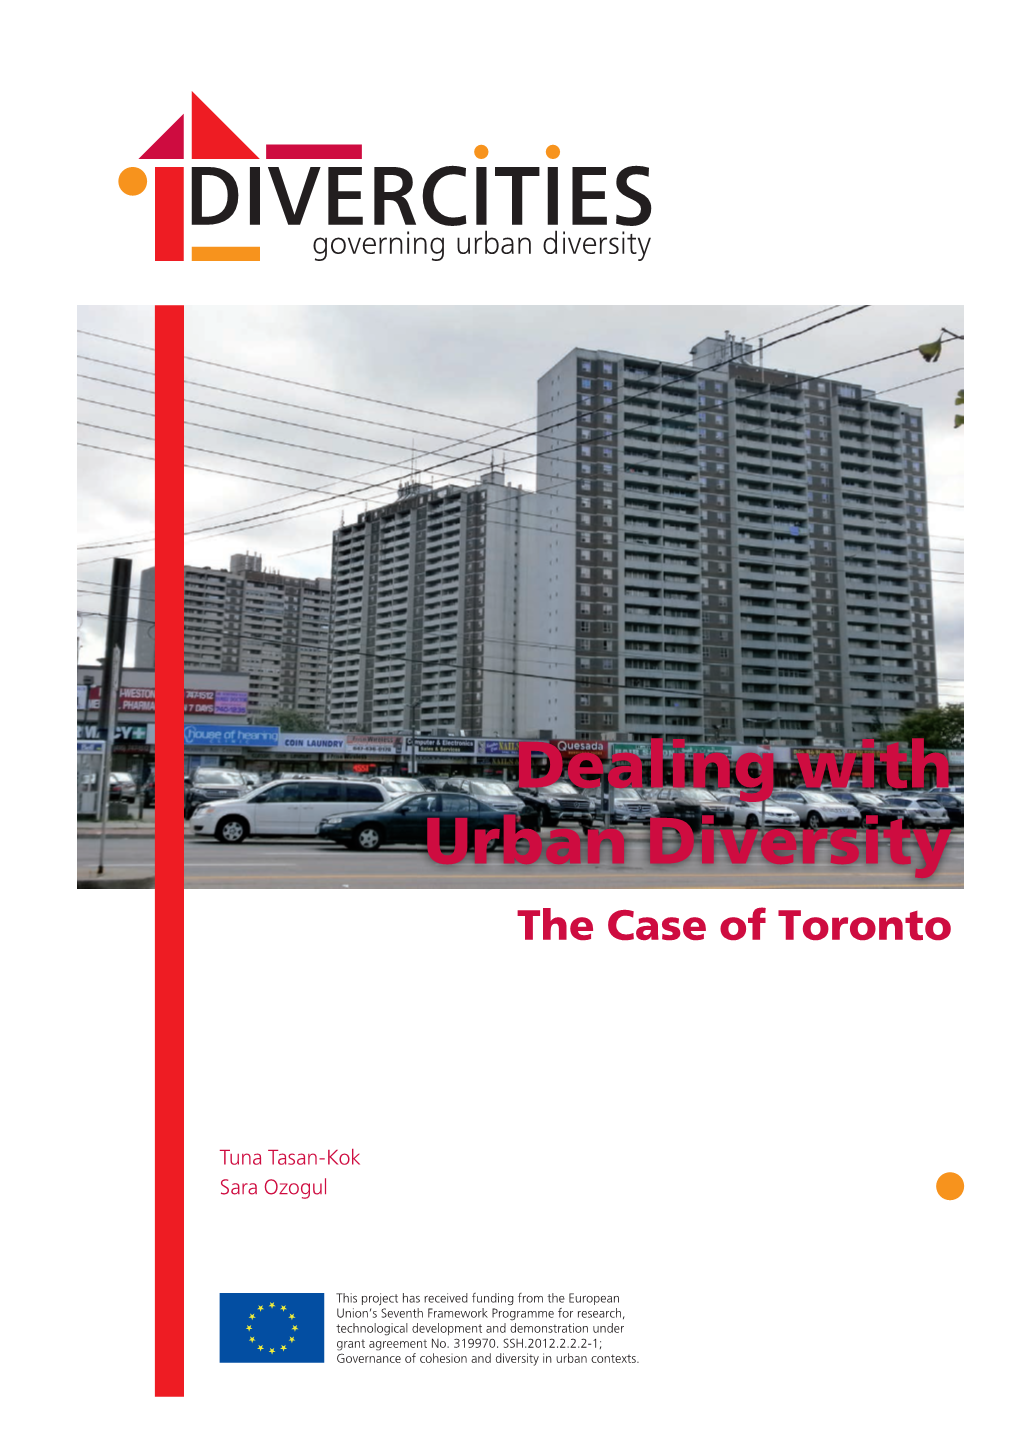 DIVERCITIES: Dealing with Urban Diversity: the Case of Toronto